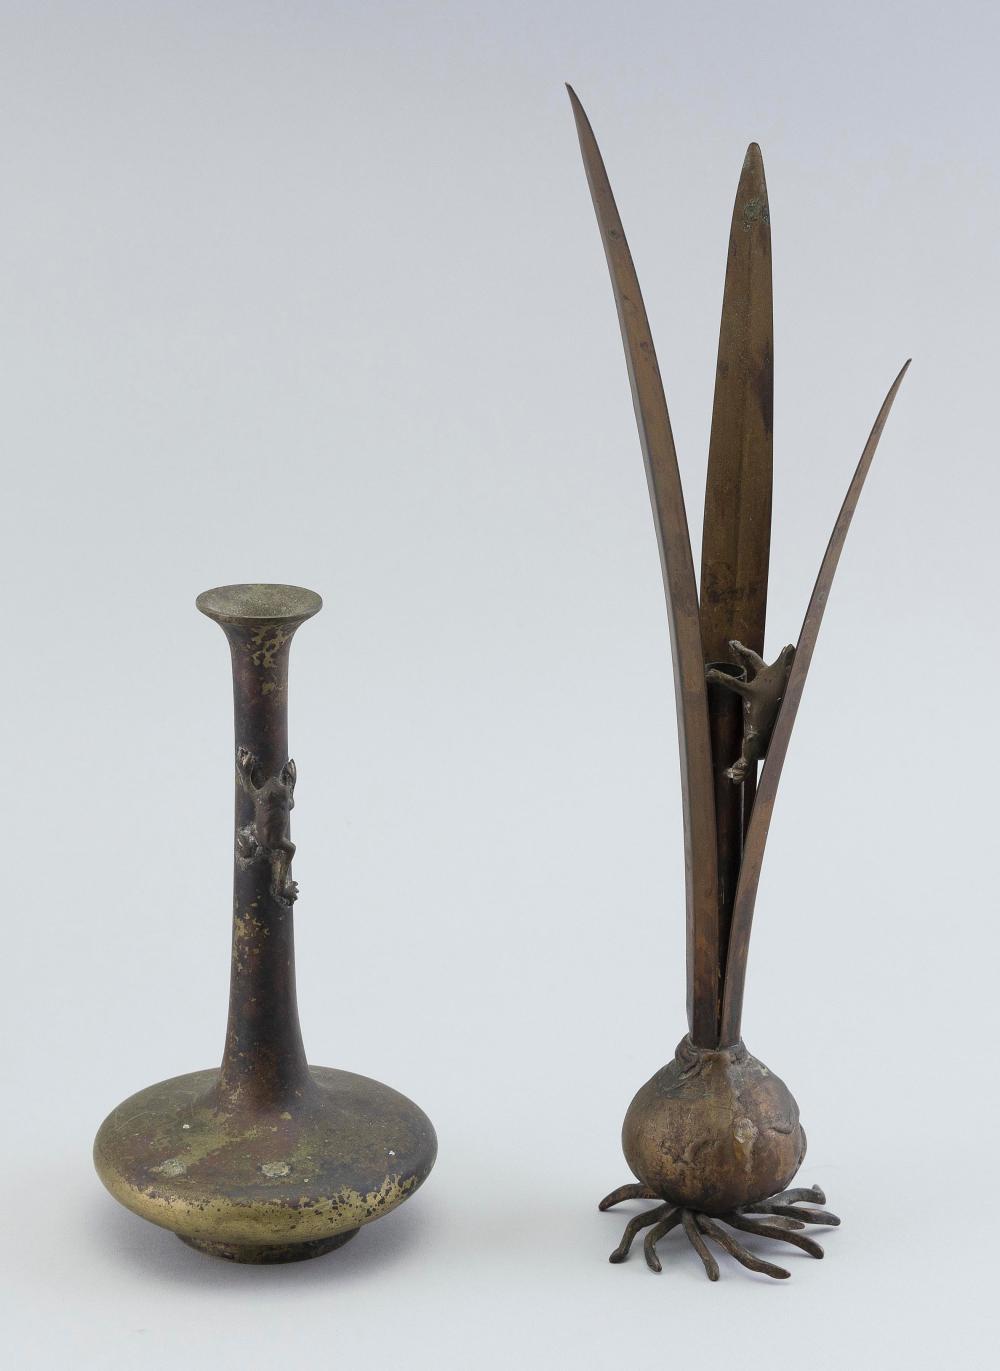 TWO BRONZE VASES WITH A FROG MOTIF